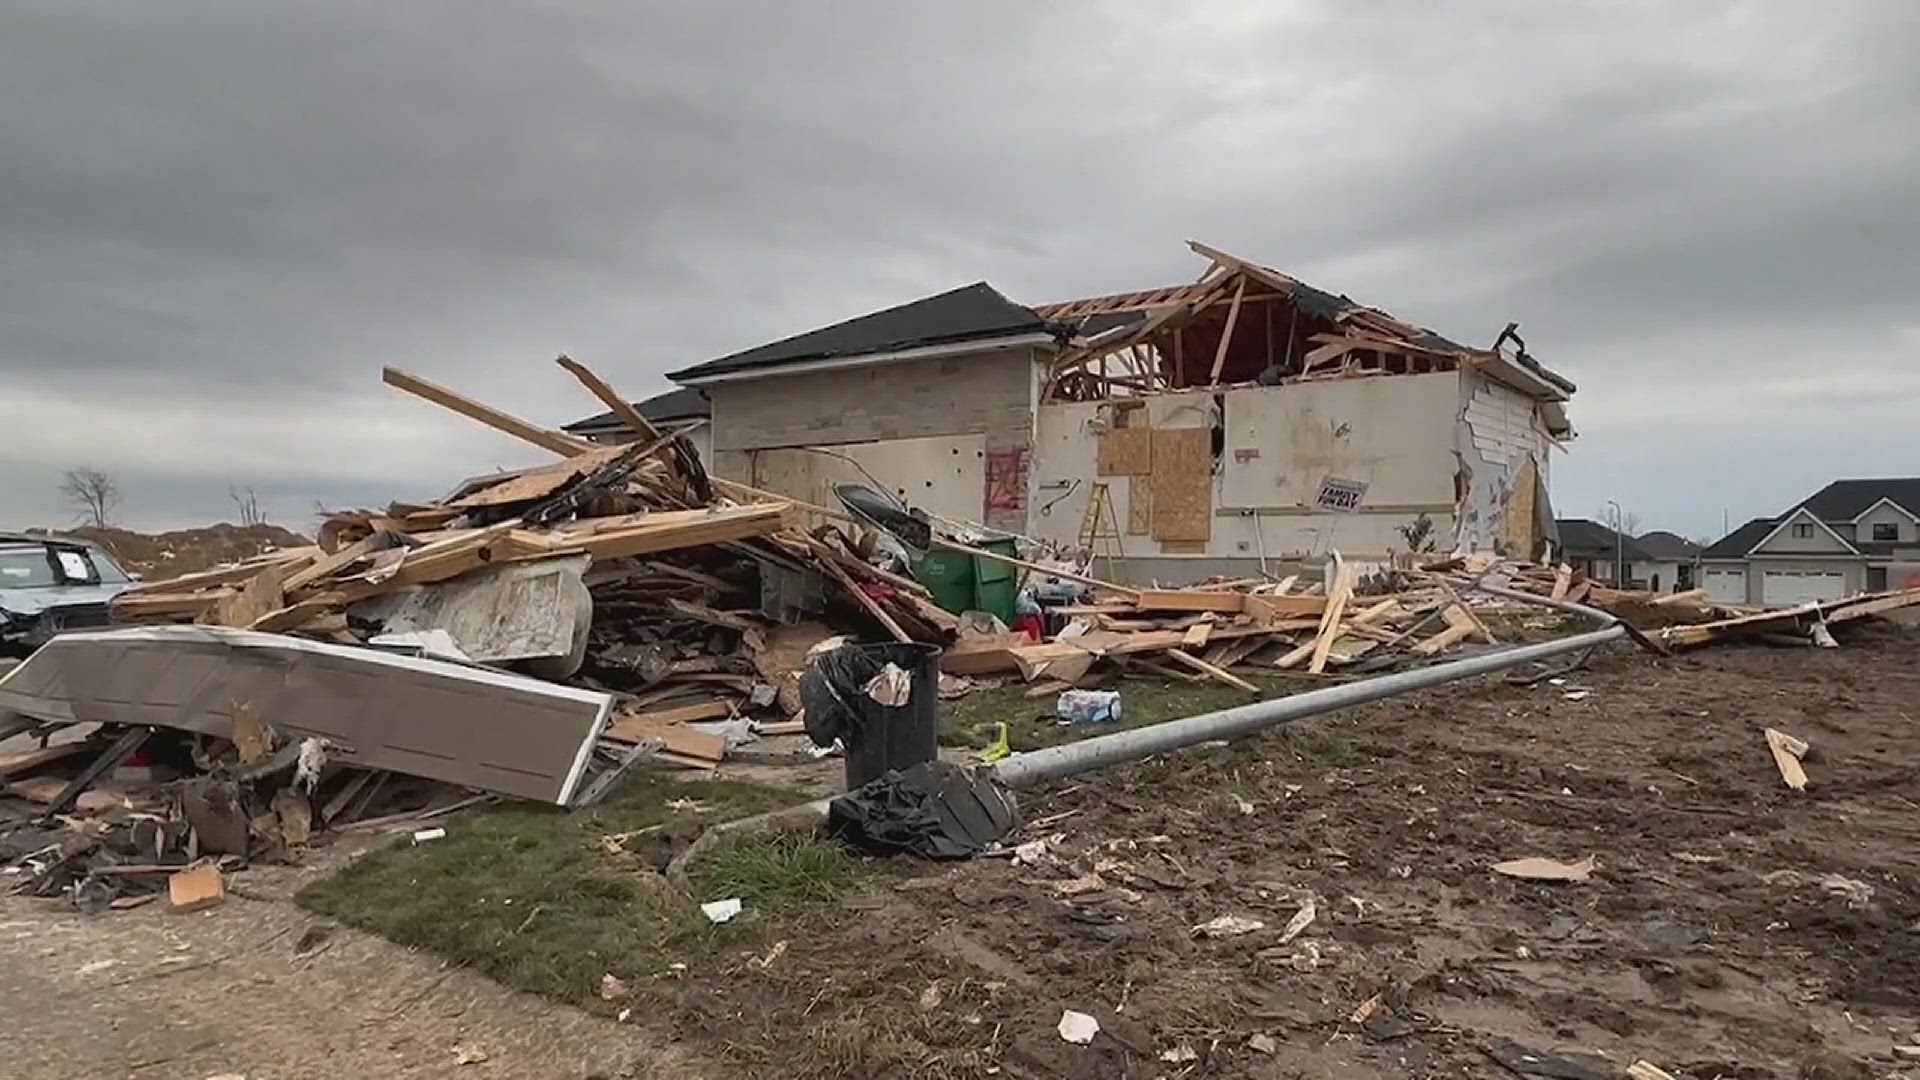 One resident in Omaha said his family is taking the process day by day as they work to rebuild their home. Search and rescue crews will resume operations this week.